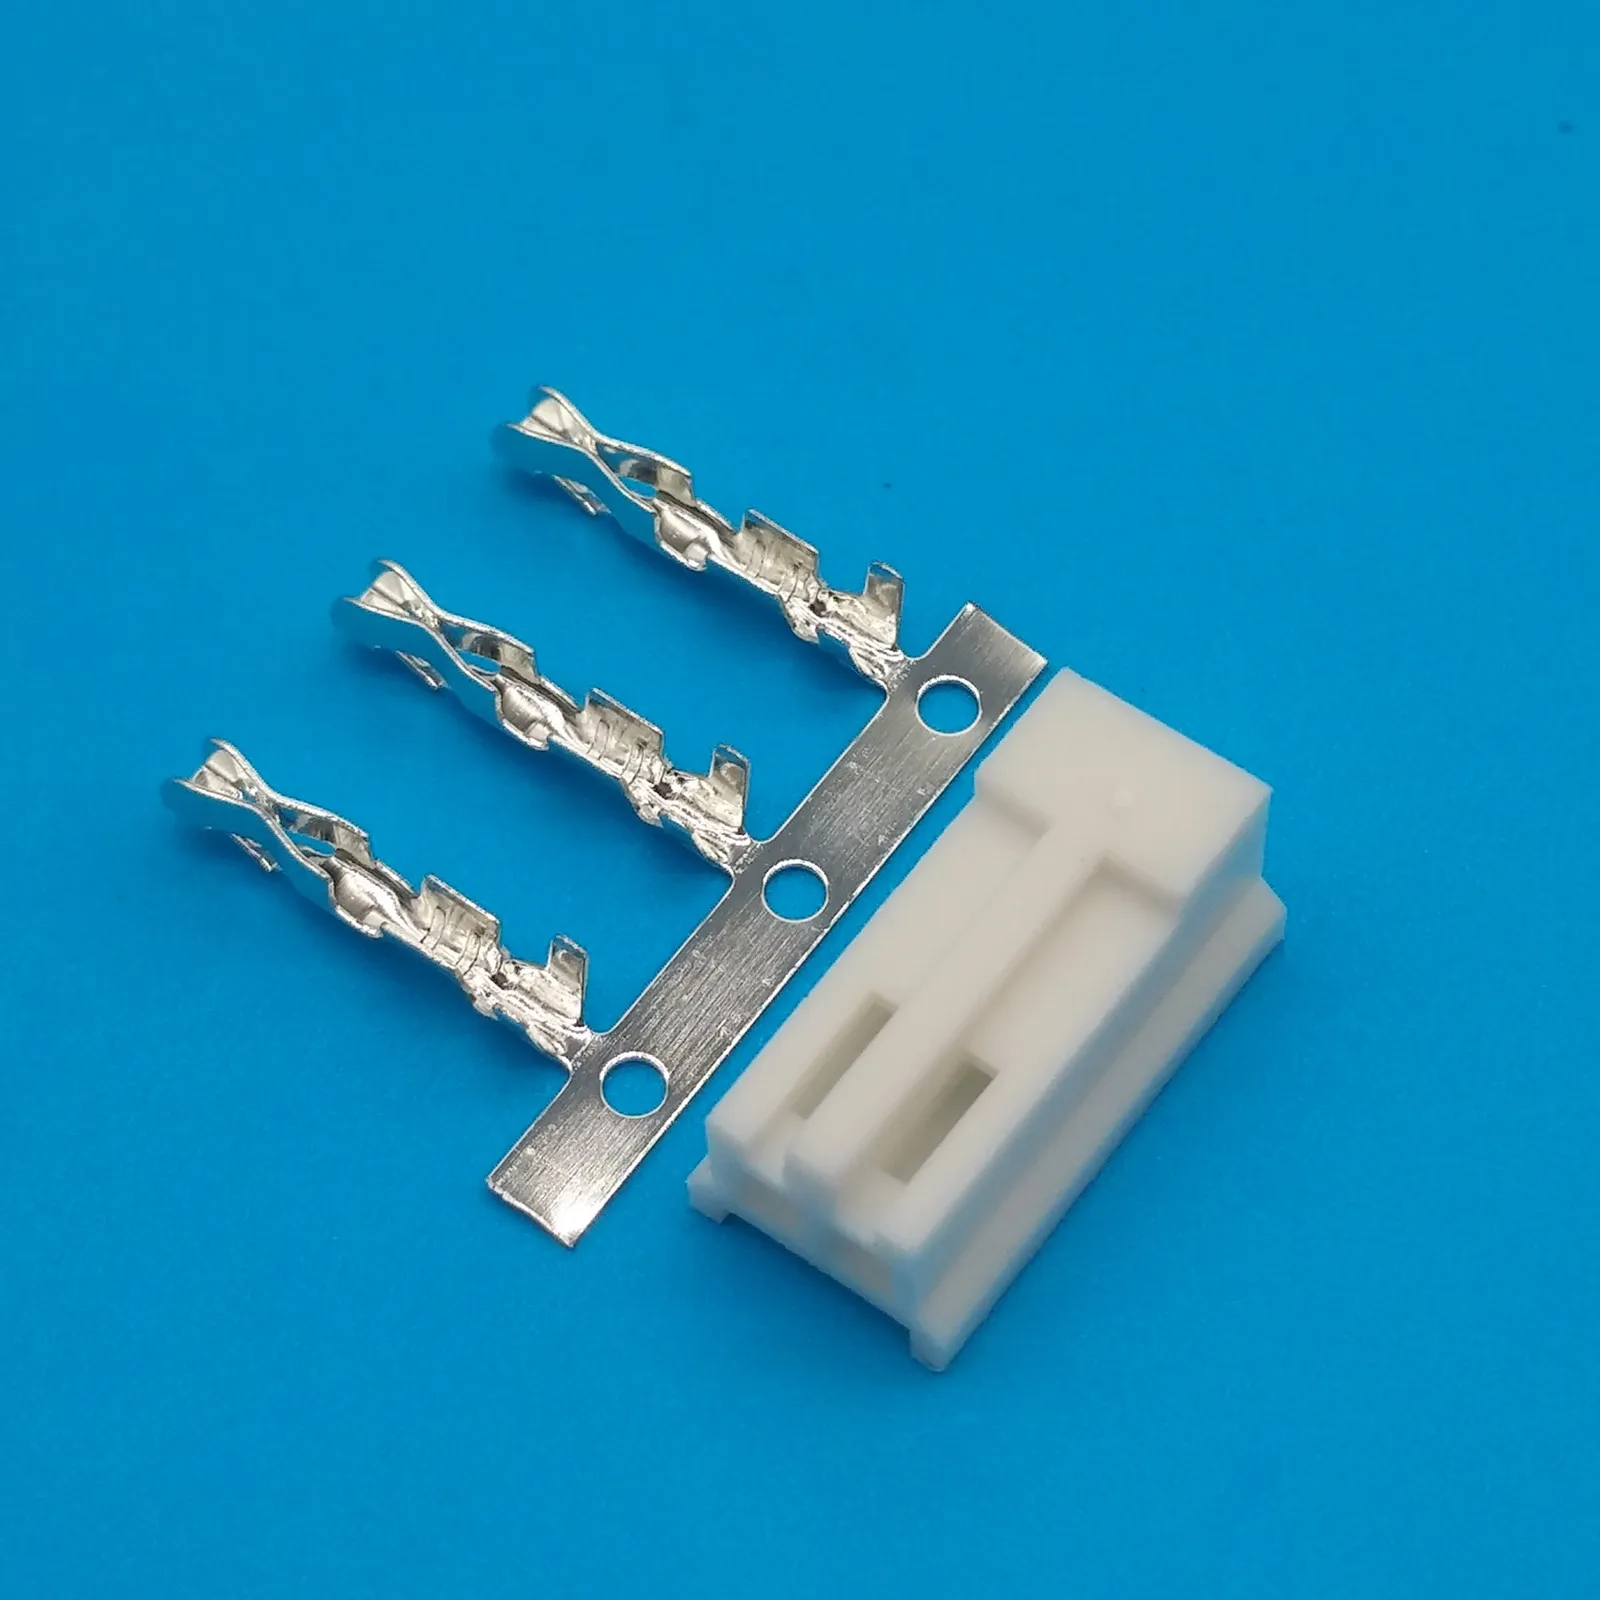 wire to board housing connector